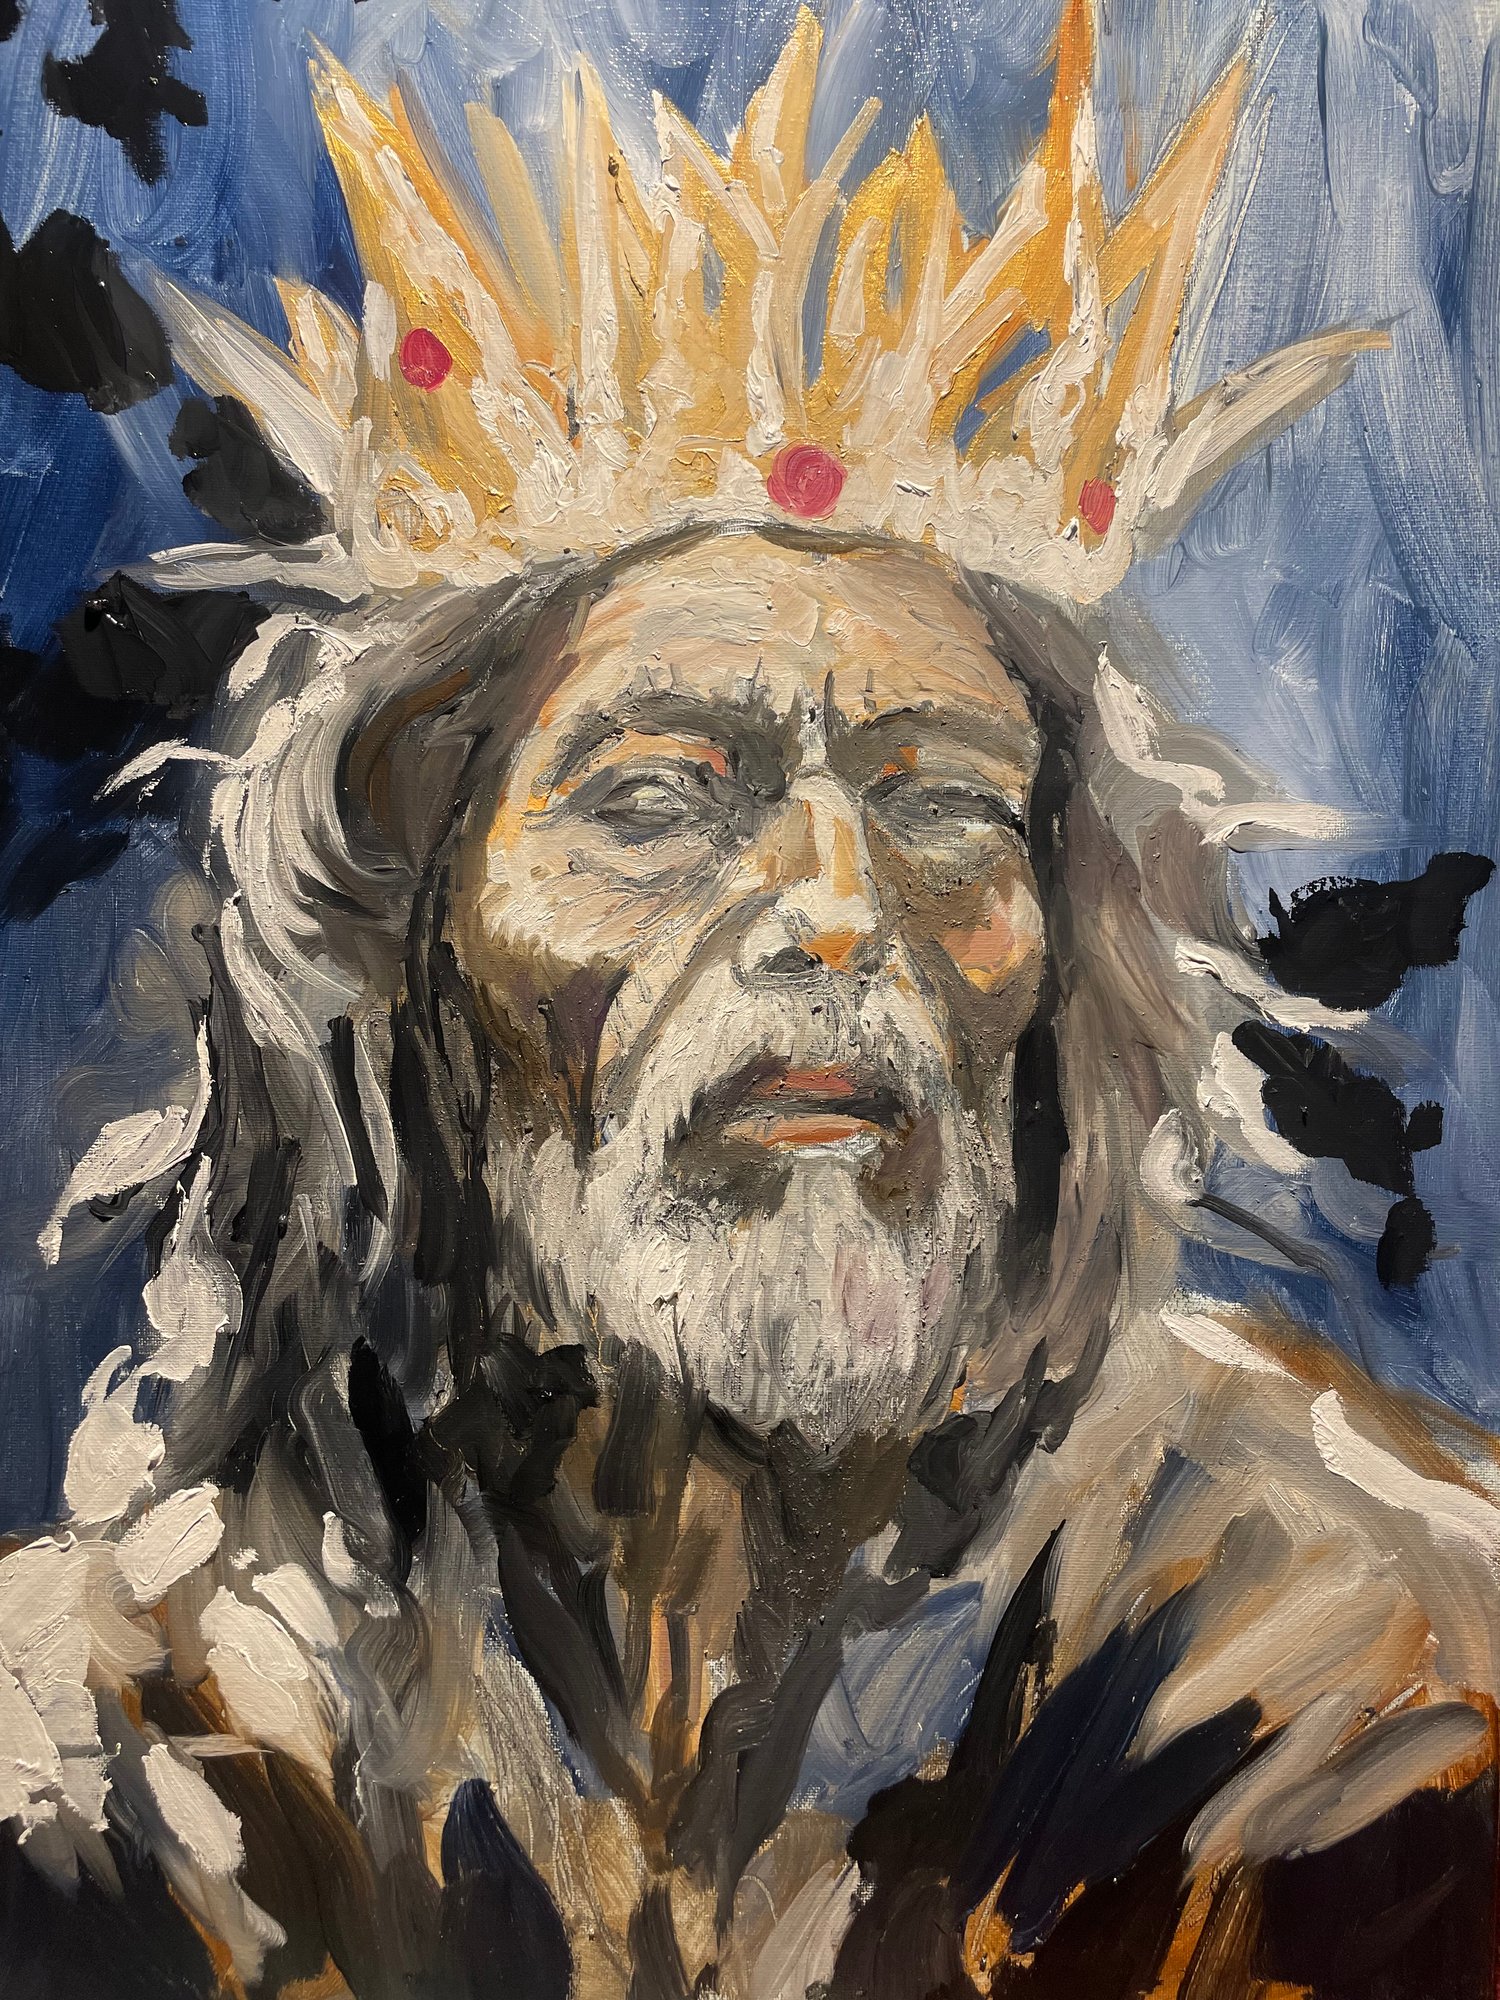 Daily painting - King Volcano